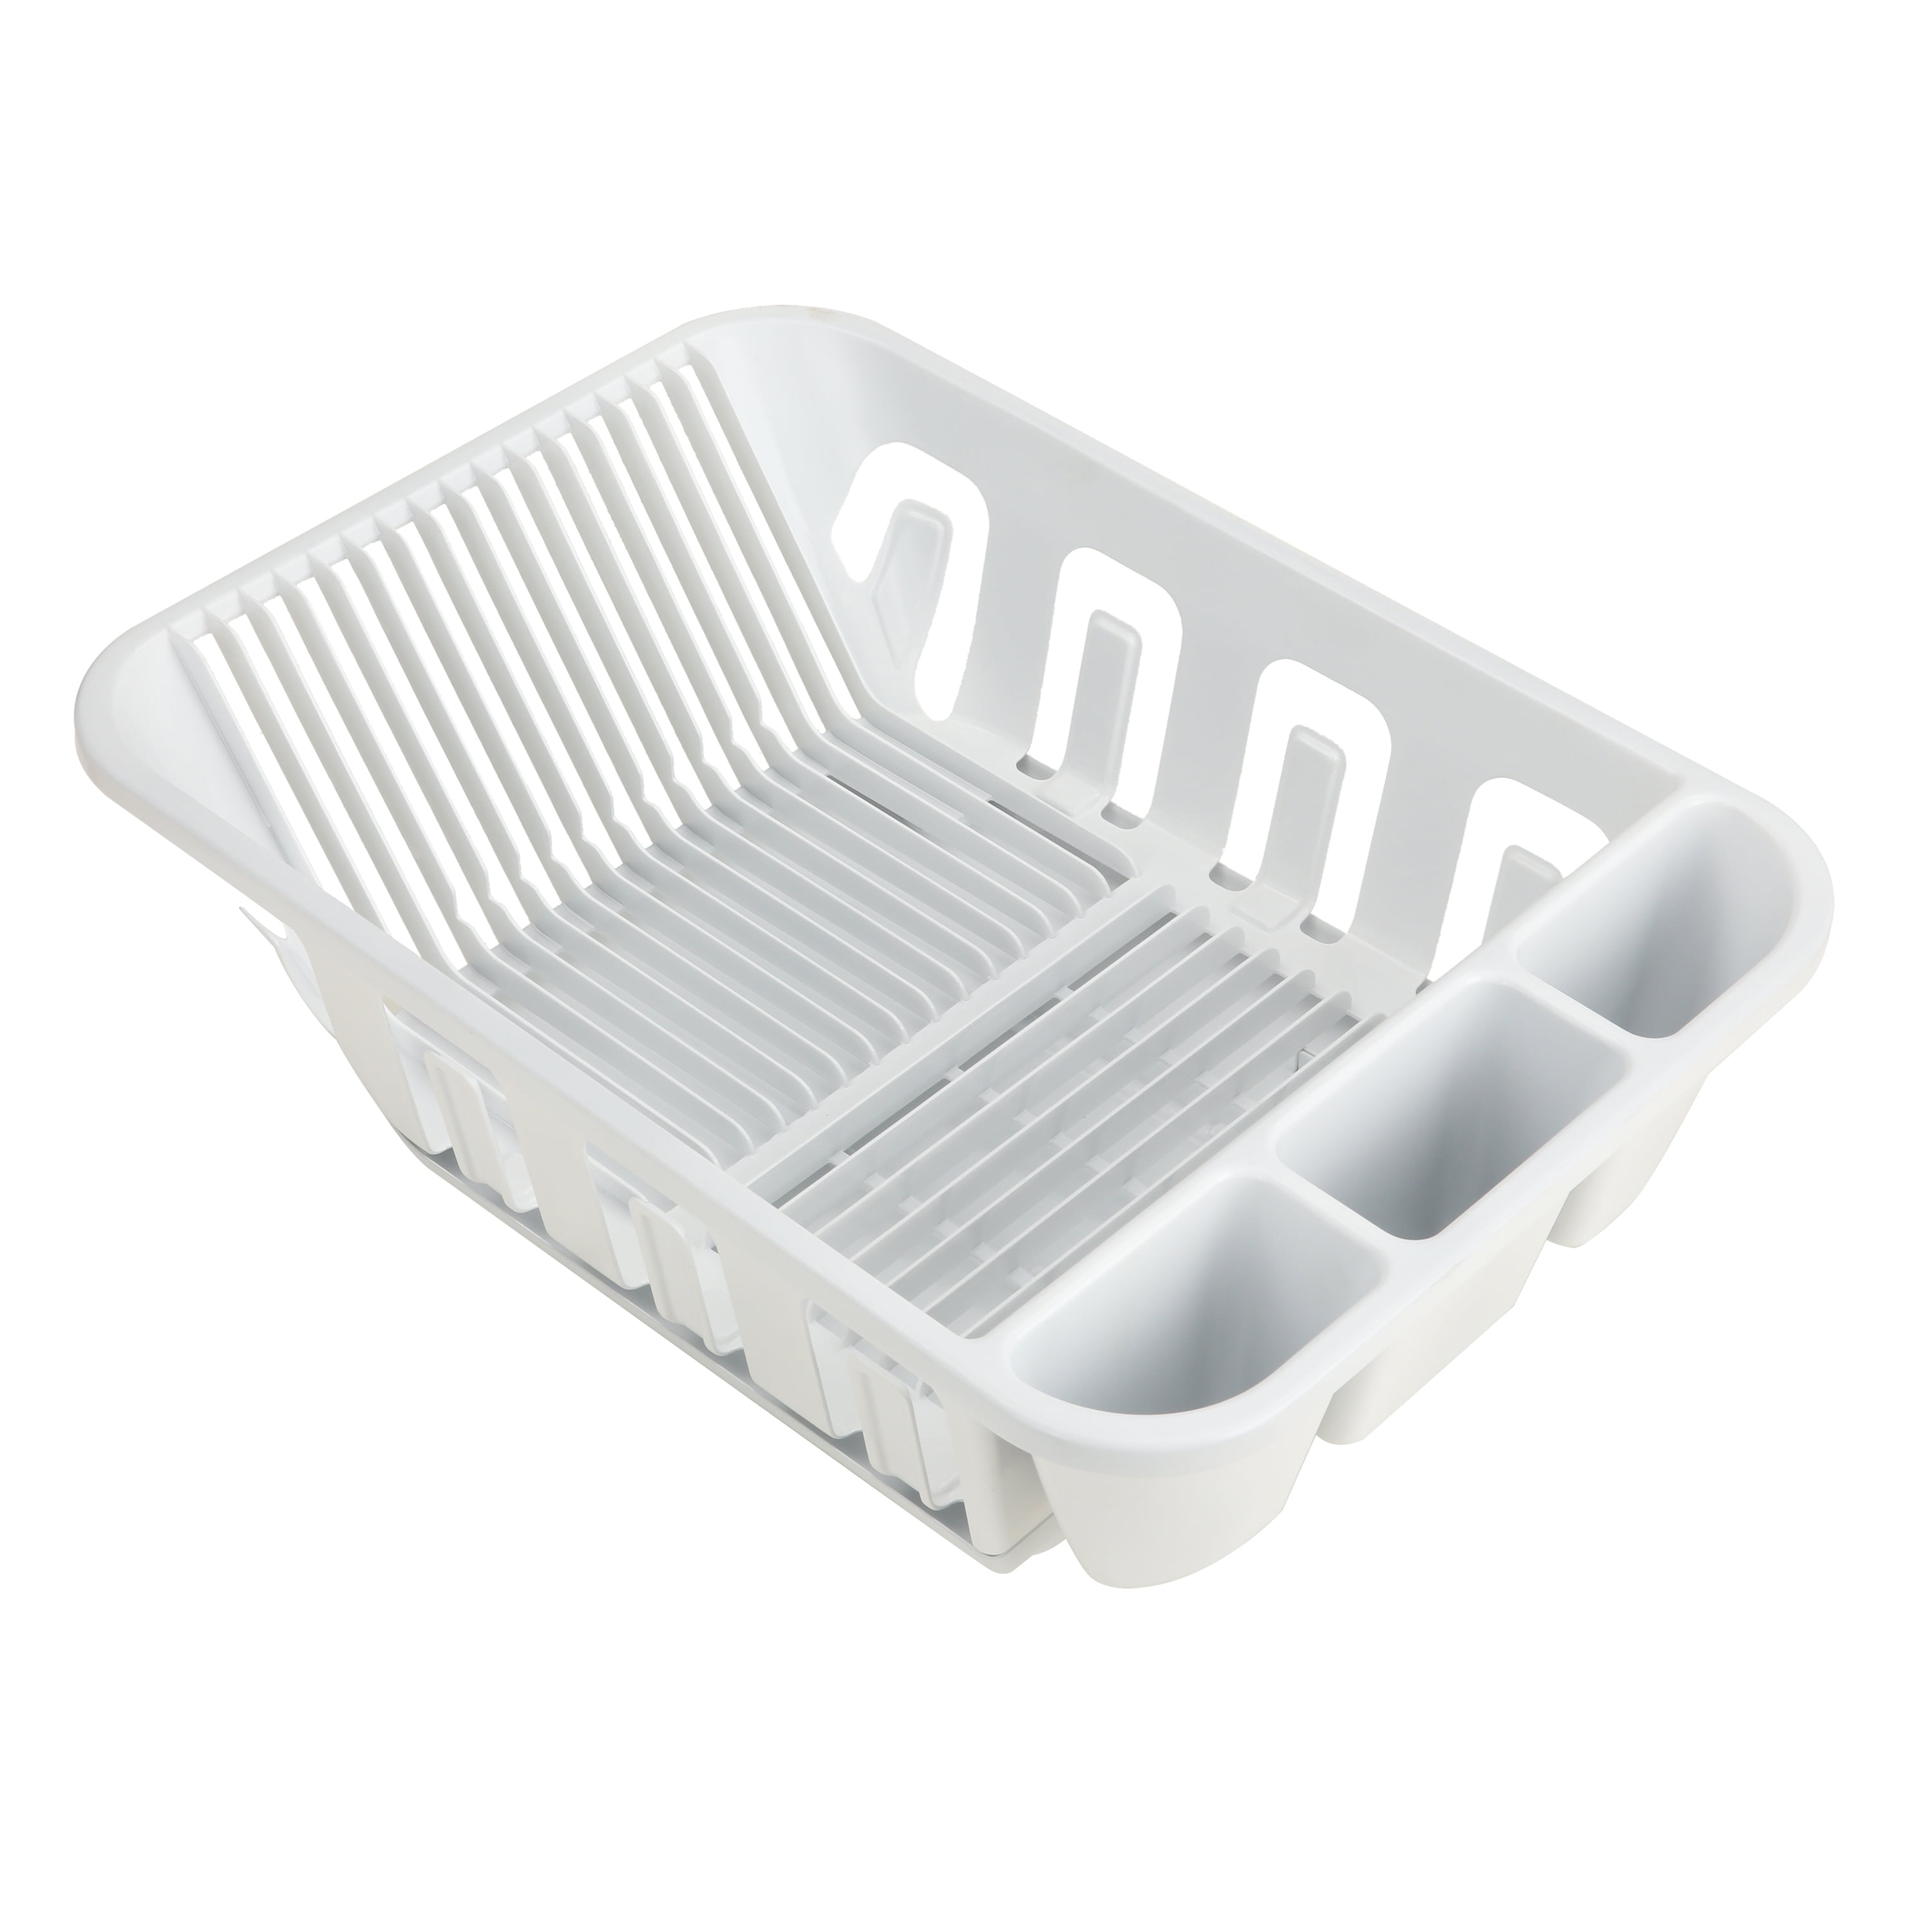 Plastic Worktop Dish Drainer Drip Tray Large Kitchen Rack G4Q2 Sink Holde D A8P9 